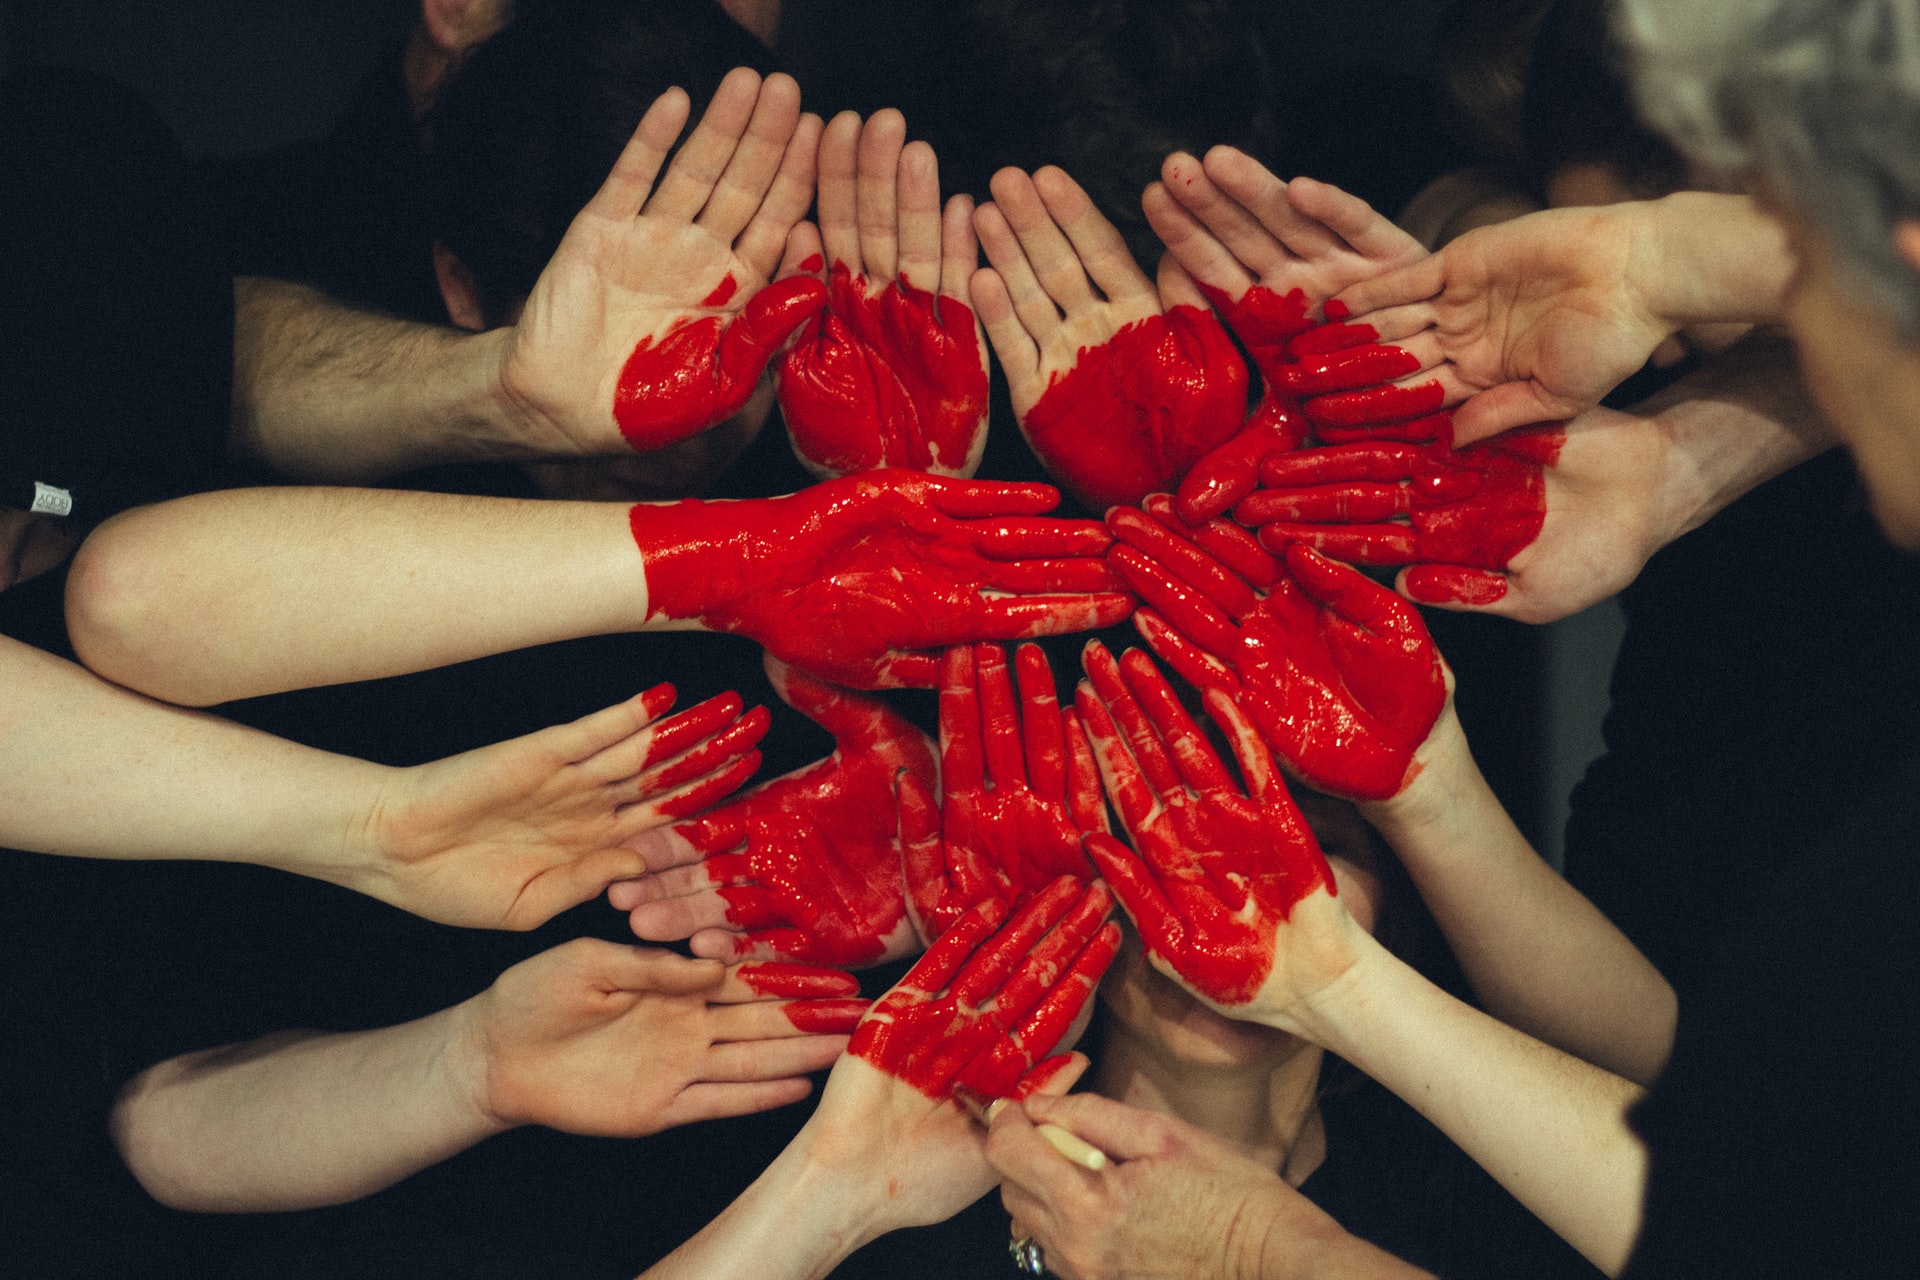 A bunch of painted hands together forming a red heart shape | Image credit: Tim Marshall via Unsplash.com